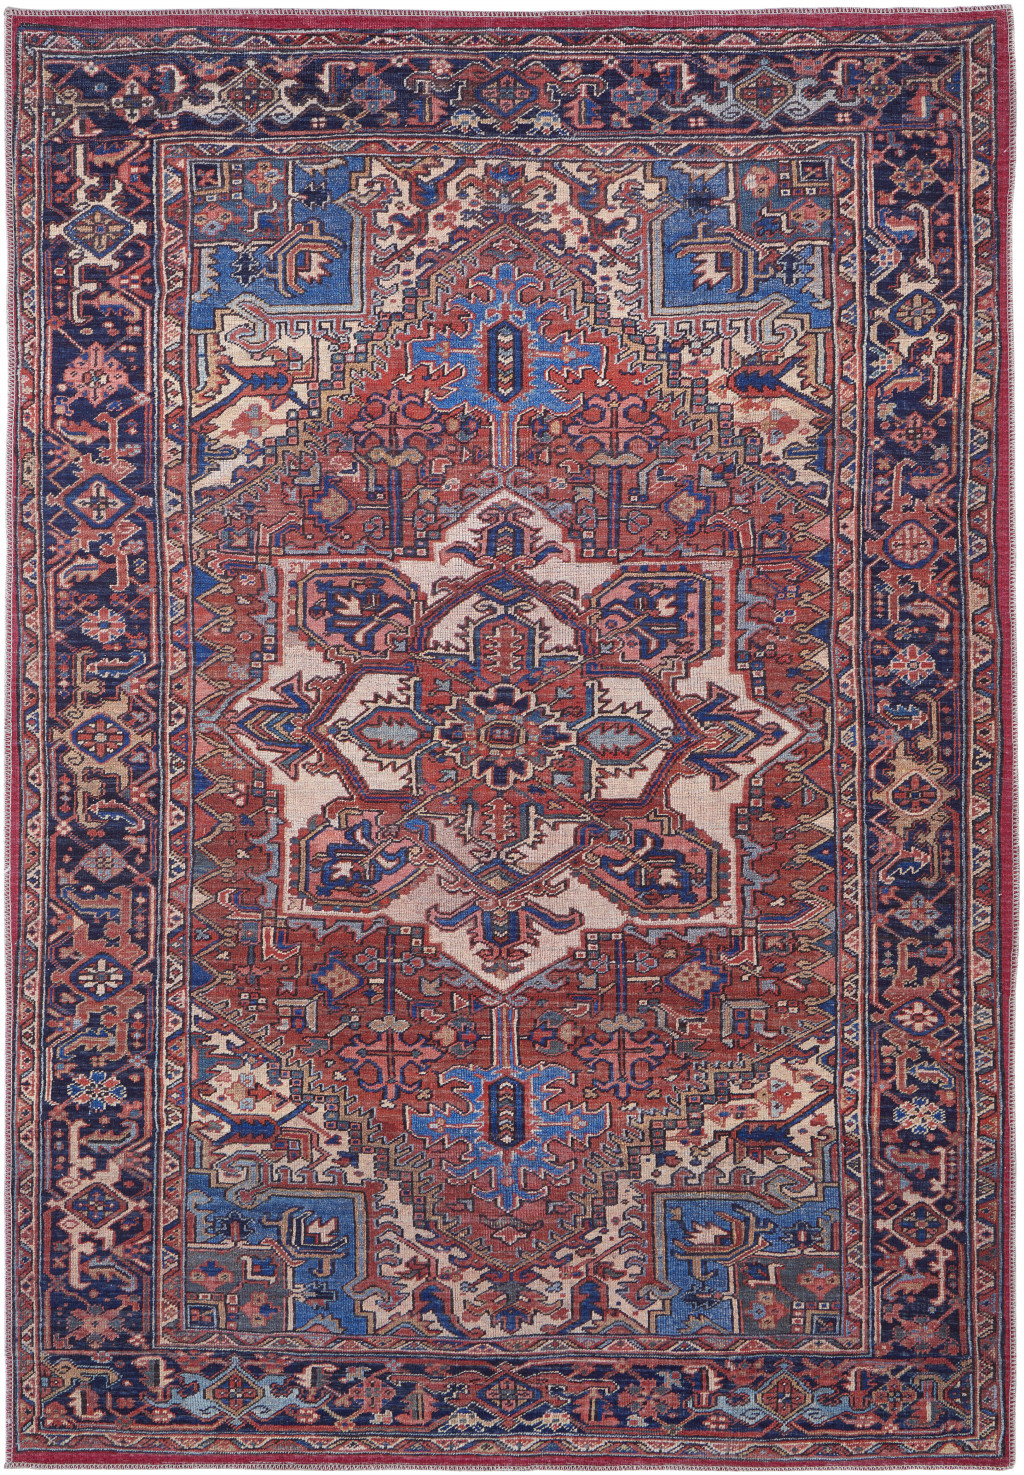 5' X 8' Red Tan And Blue Floral Power Loom Area Rug-515113-1